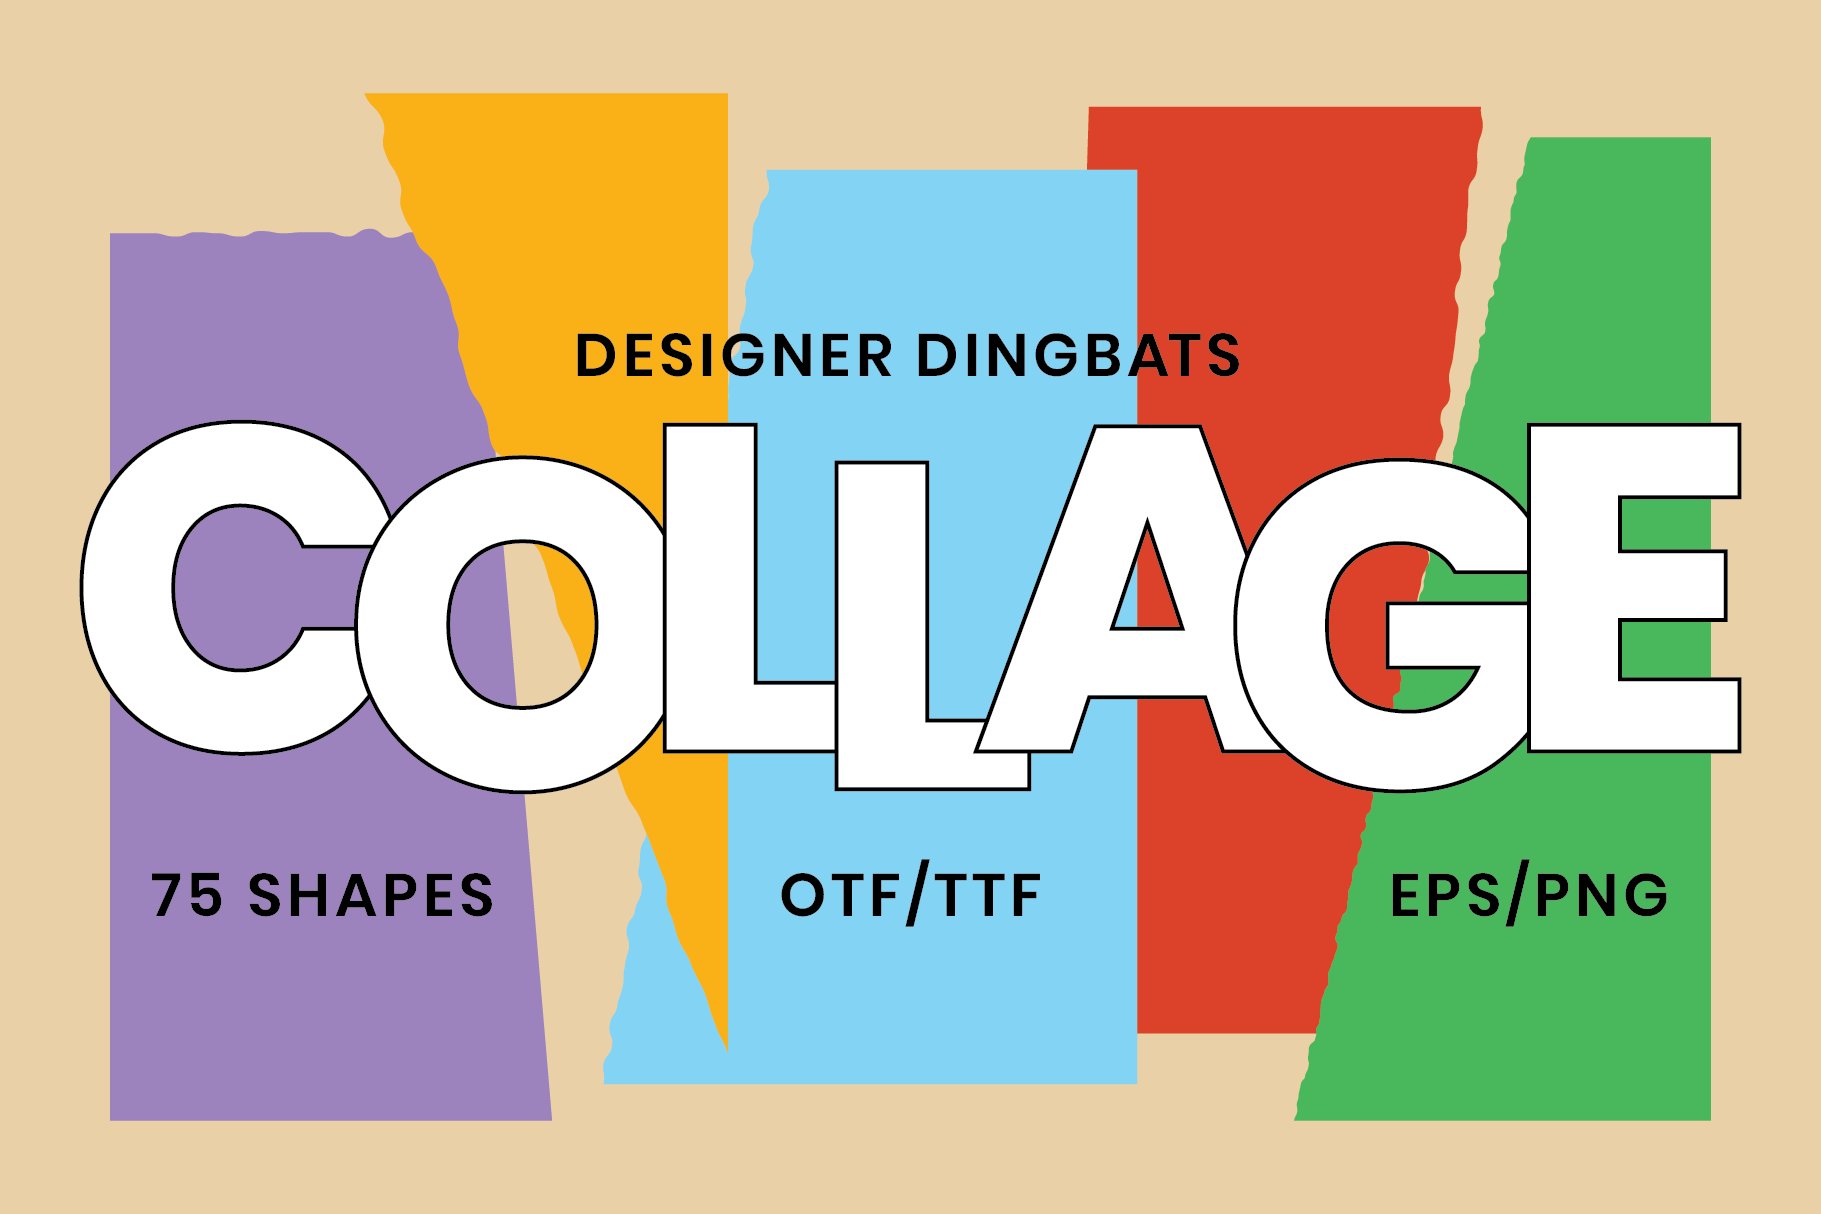 Collage Dingbats Font - 75 Shapes! cover image.